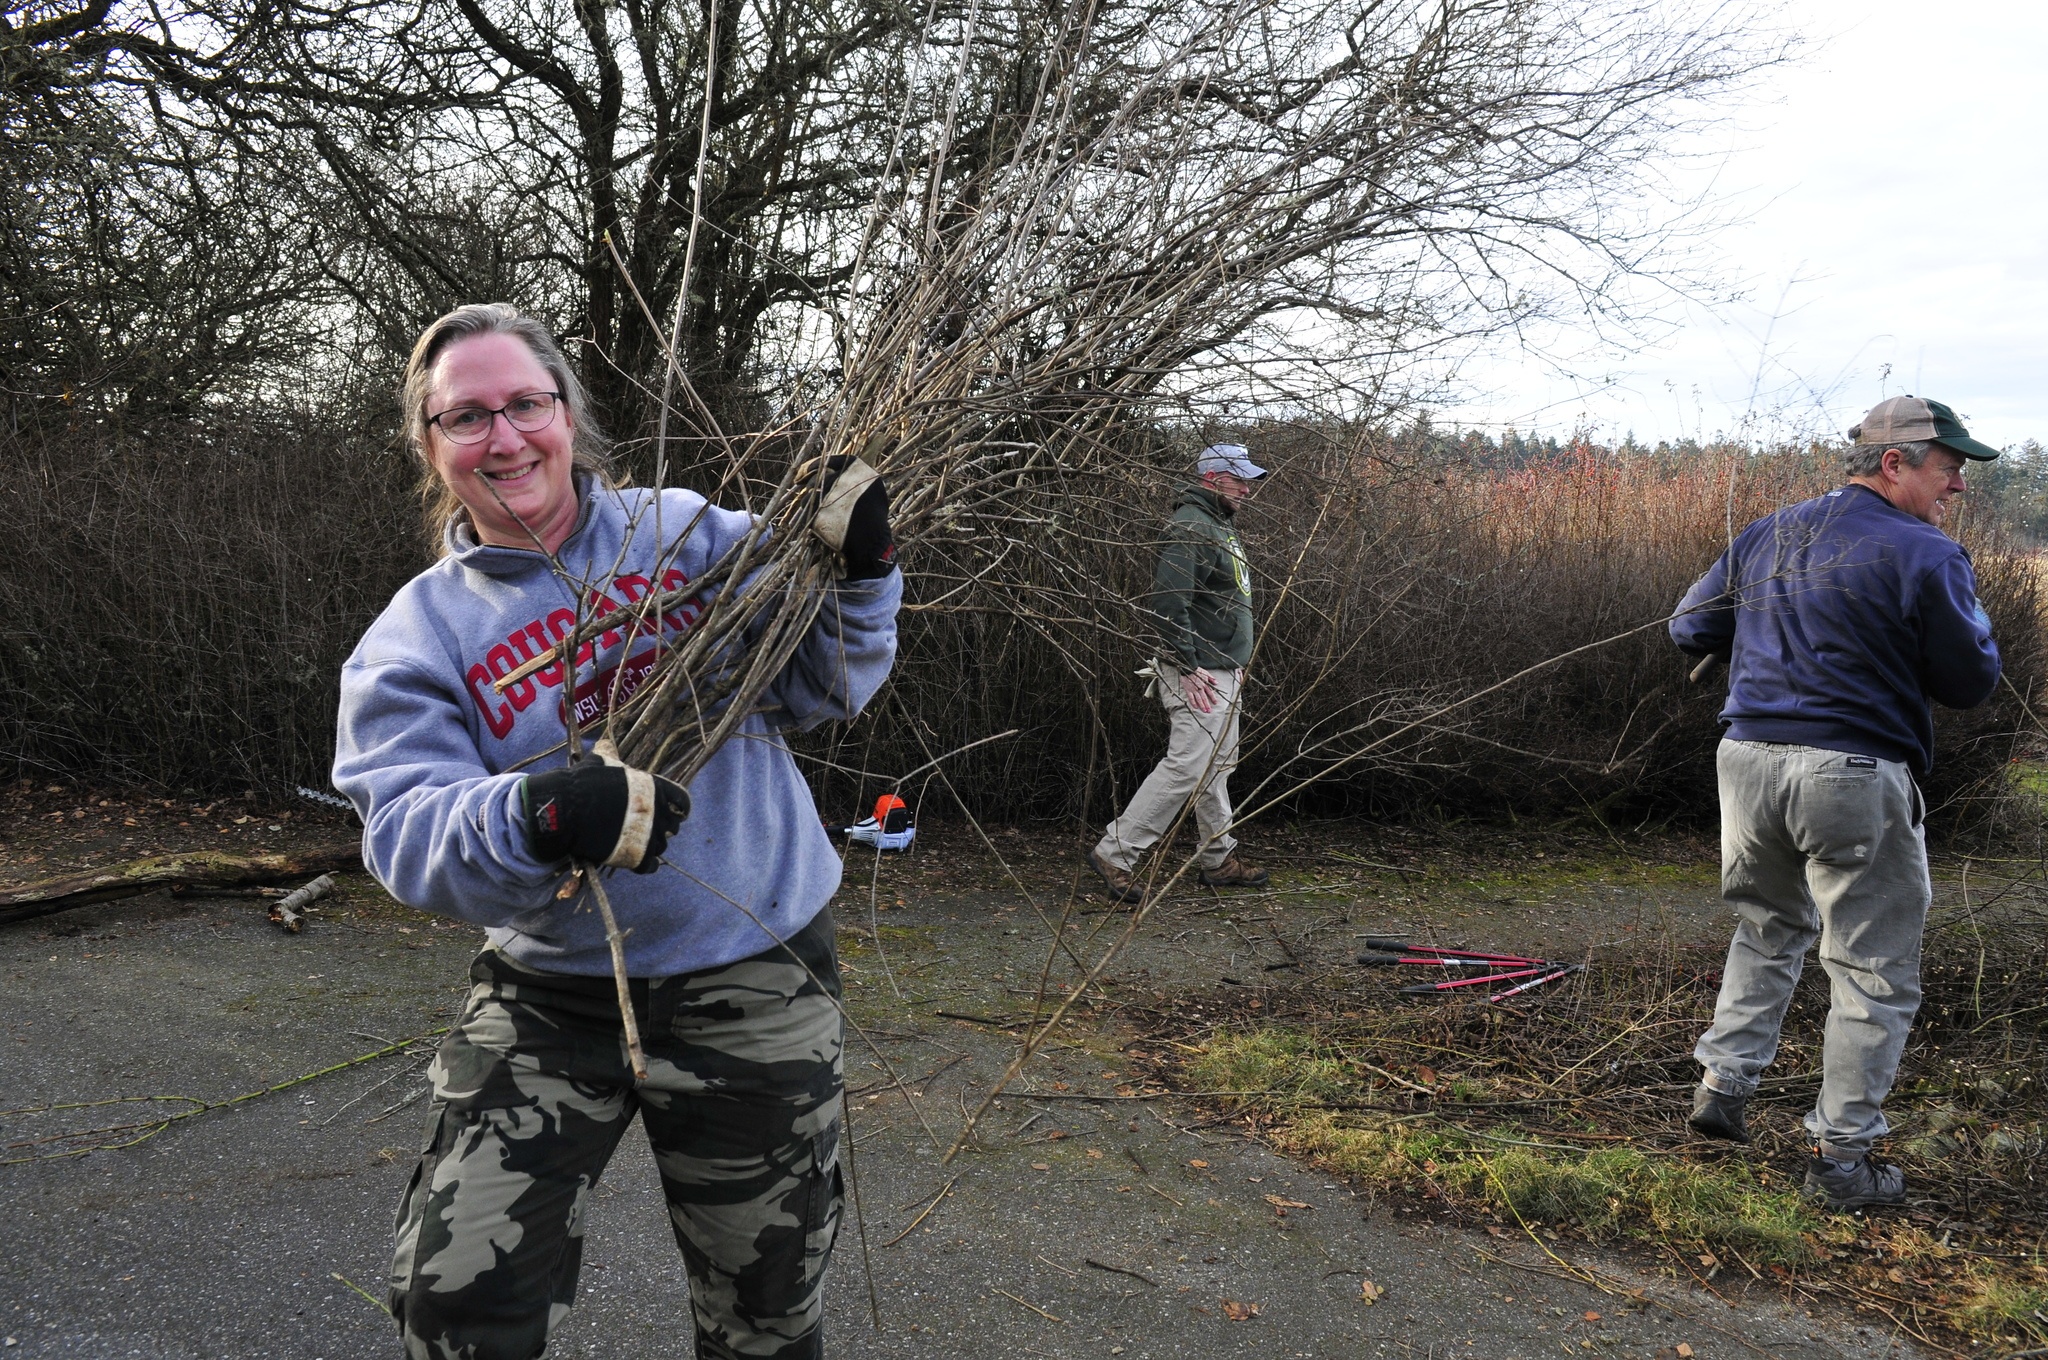 Valerie Matazzoni, a retired Navy veteran, participates in a veteran volunteer project along with the National Parks Conservation Association to help maintain the Prairie Wayside portion of Ebey’s Prairie in Coupeville Monday. Photo by Michael Watkins/Whidbey News-Times